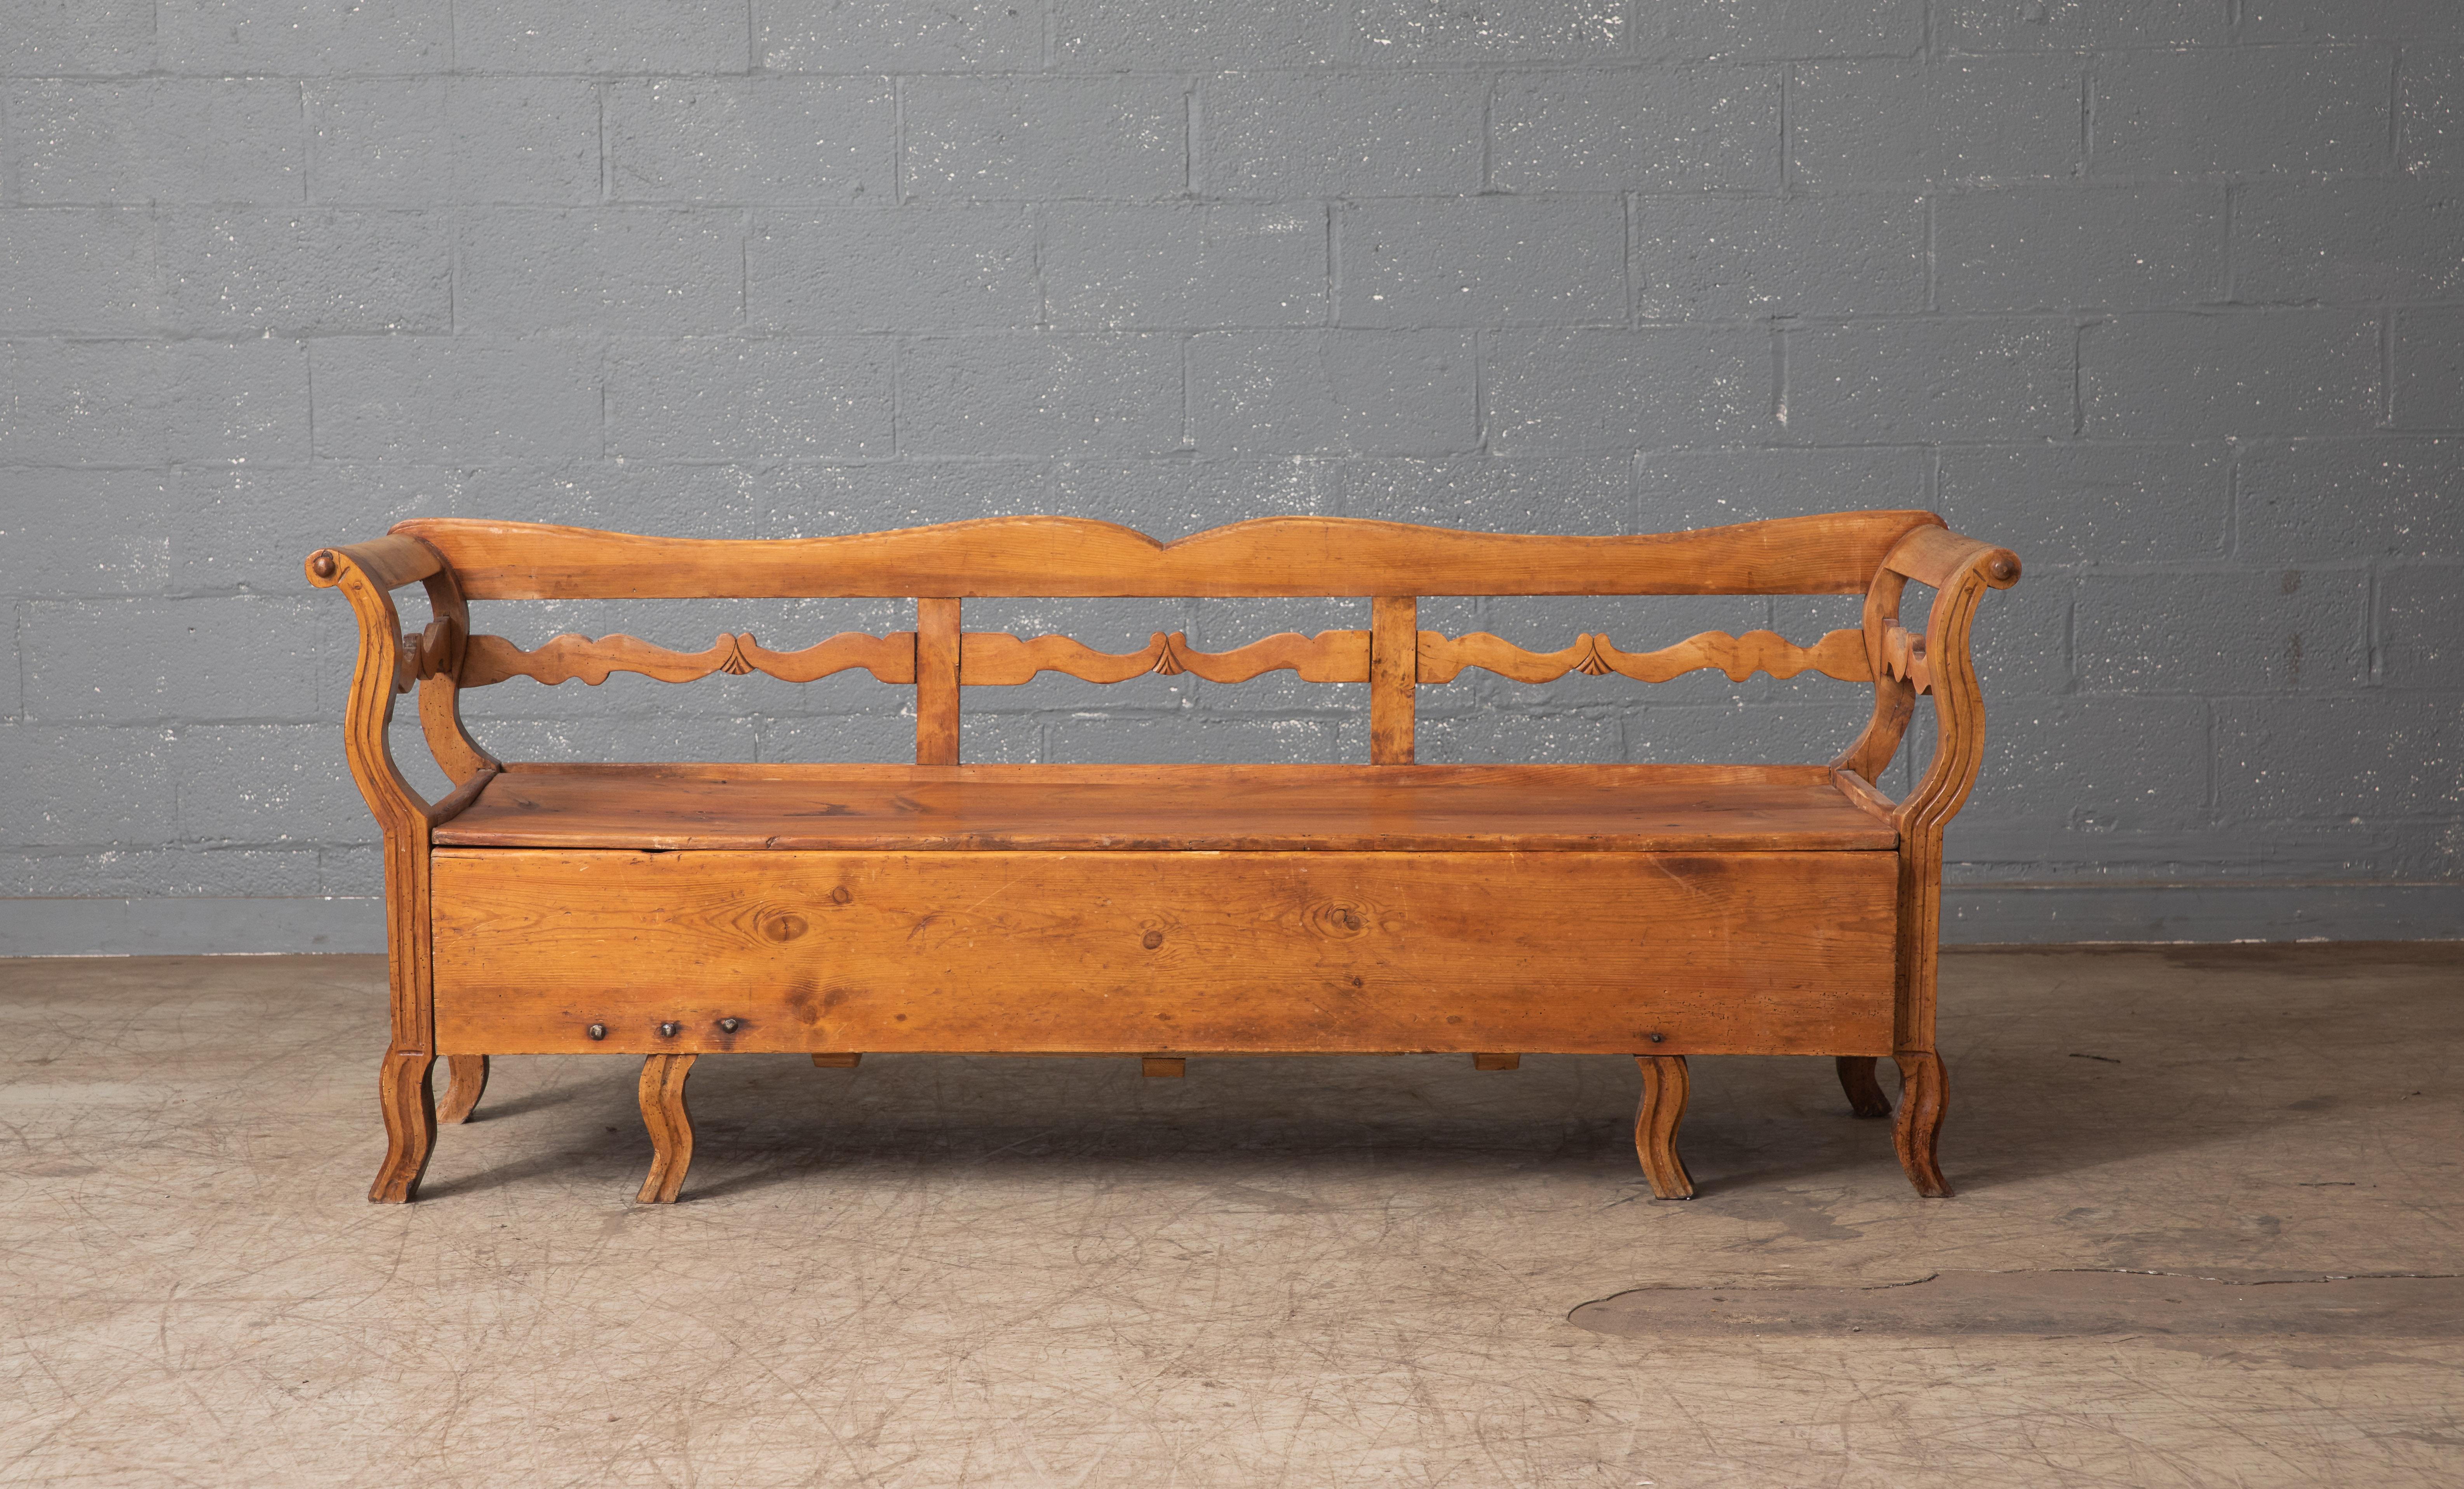 Traditional Swedish bench with storage. These type of benches were typically made and used on farms in mid- to late 19th century. The storage inside the bench was typically filled with straw and blankets and people would sleep in them. They were